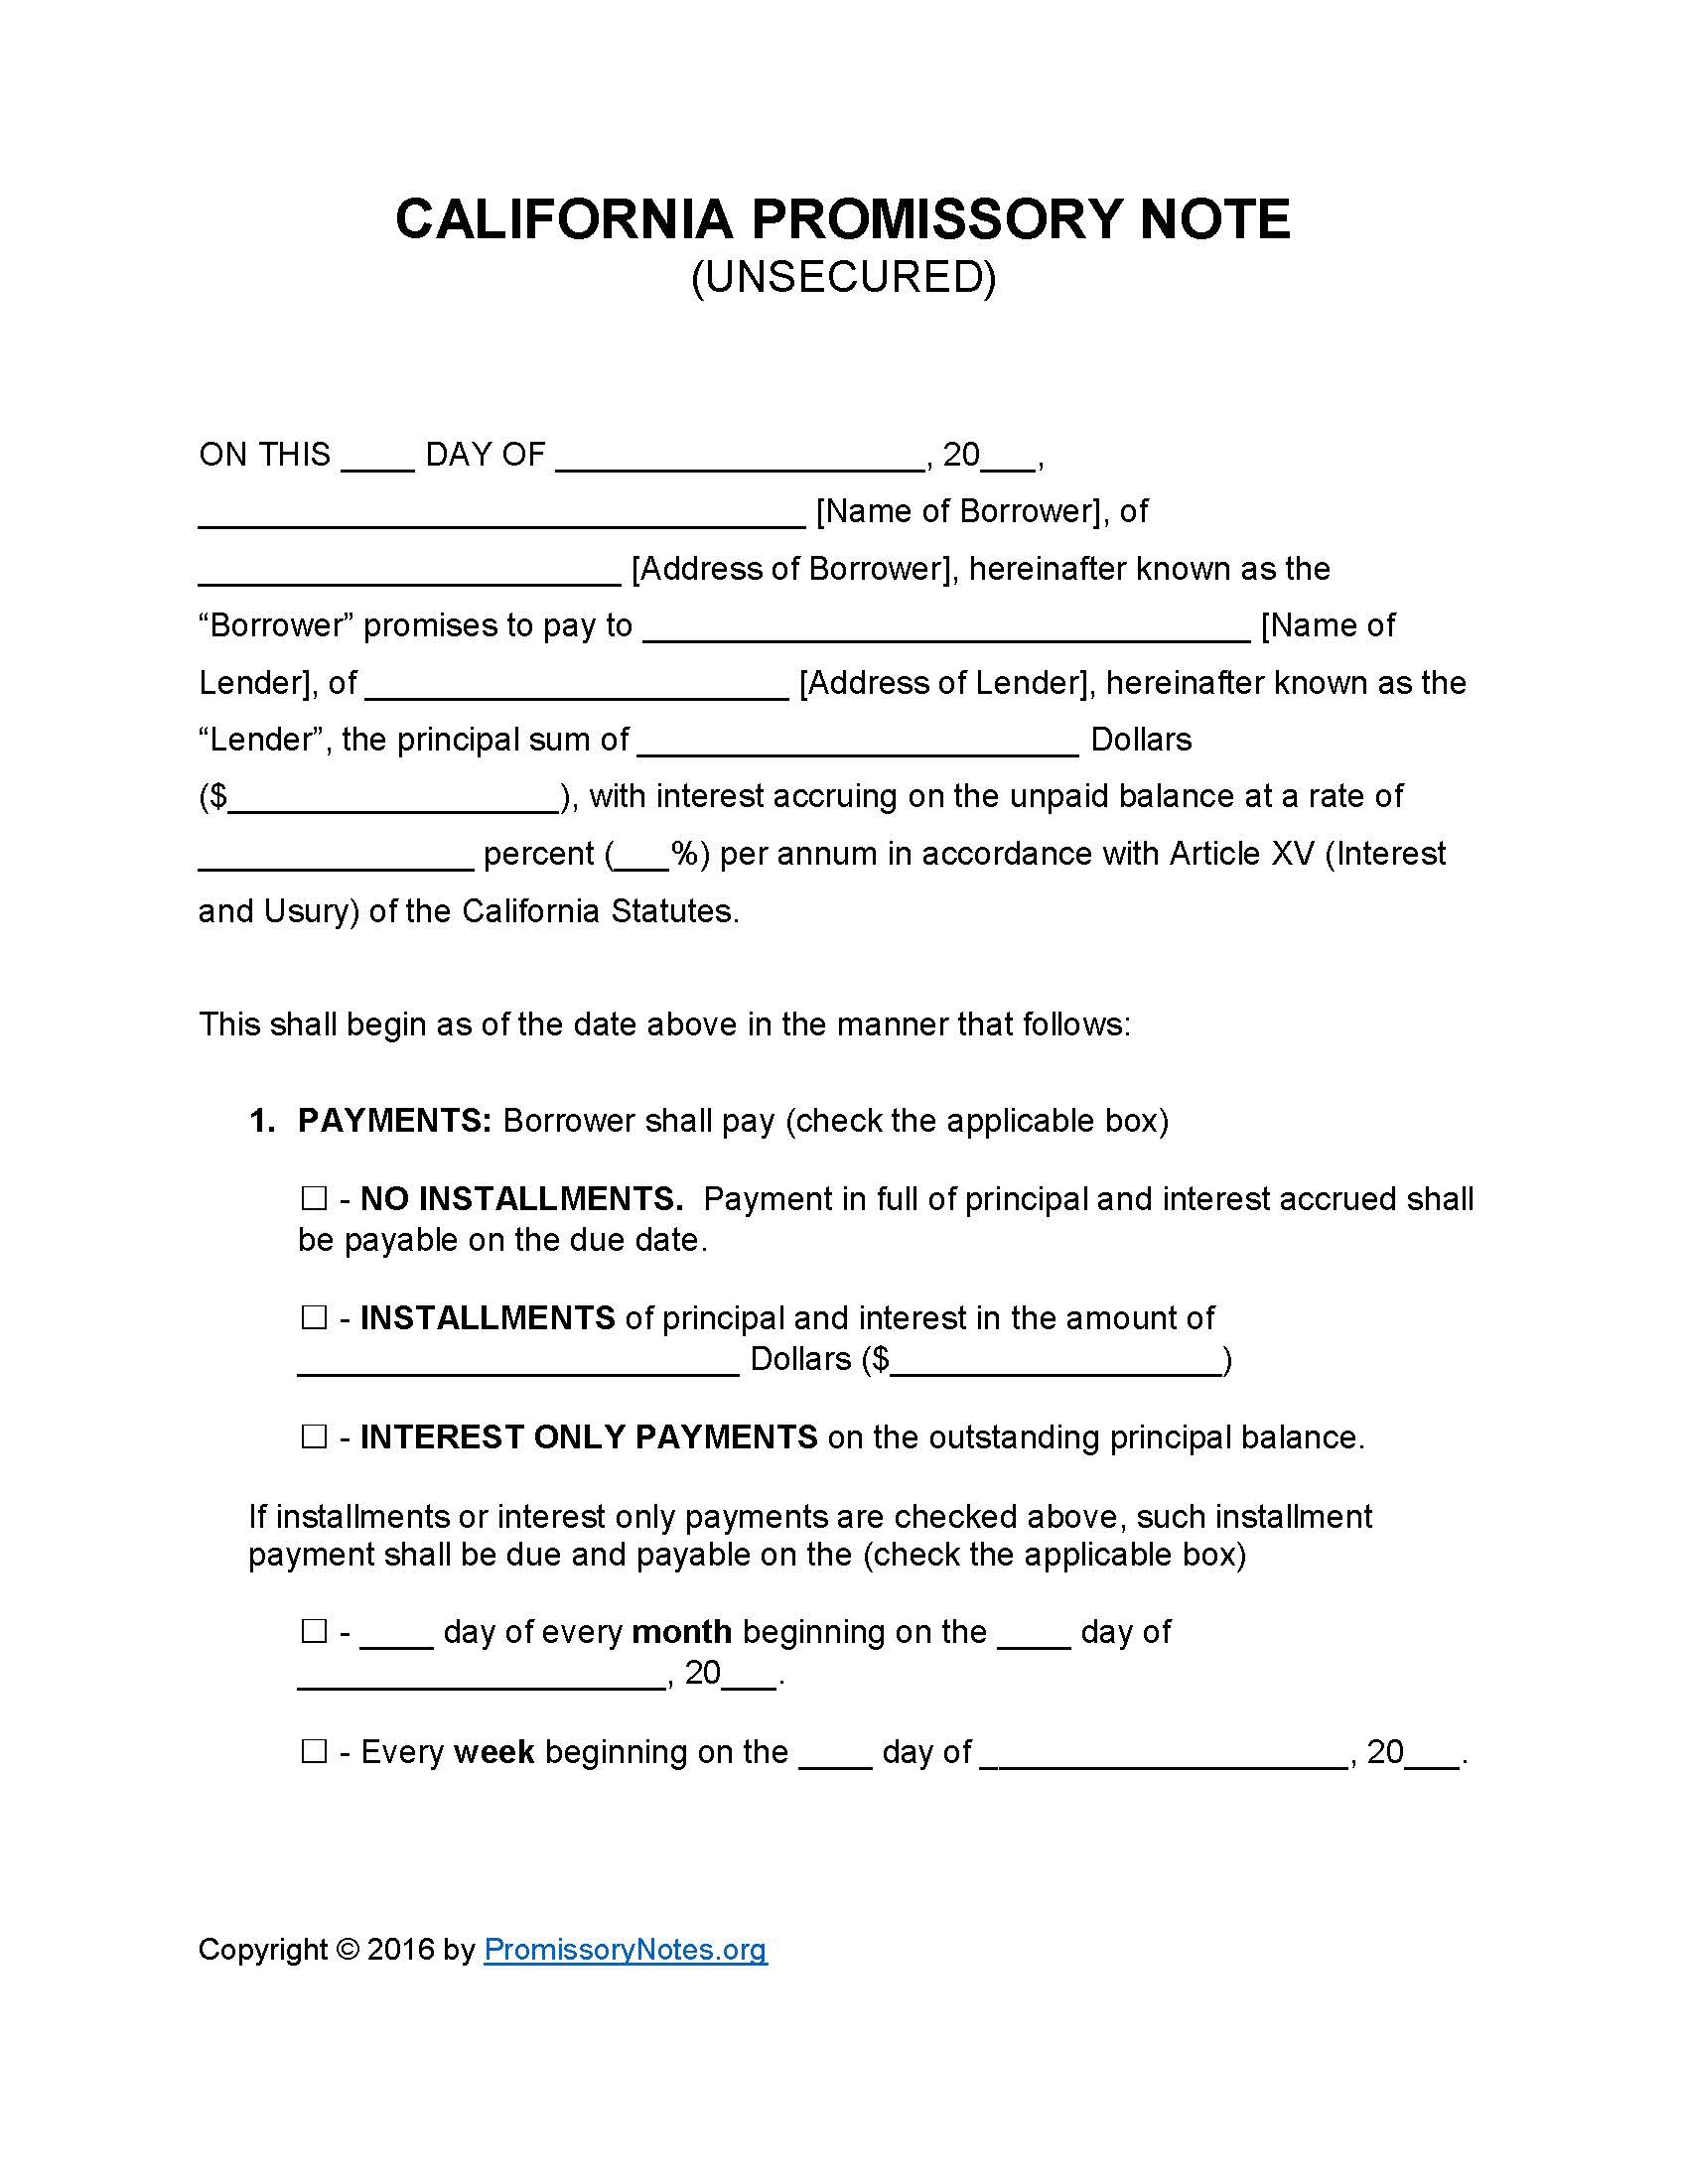 California Unsecured Promissory Note Template - Promissory Notes - Free Promissory Note Printable Form